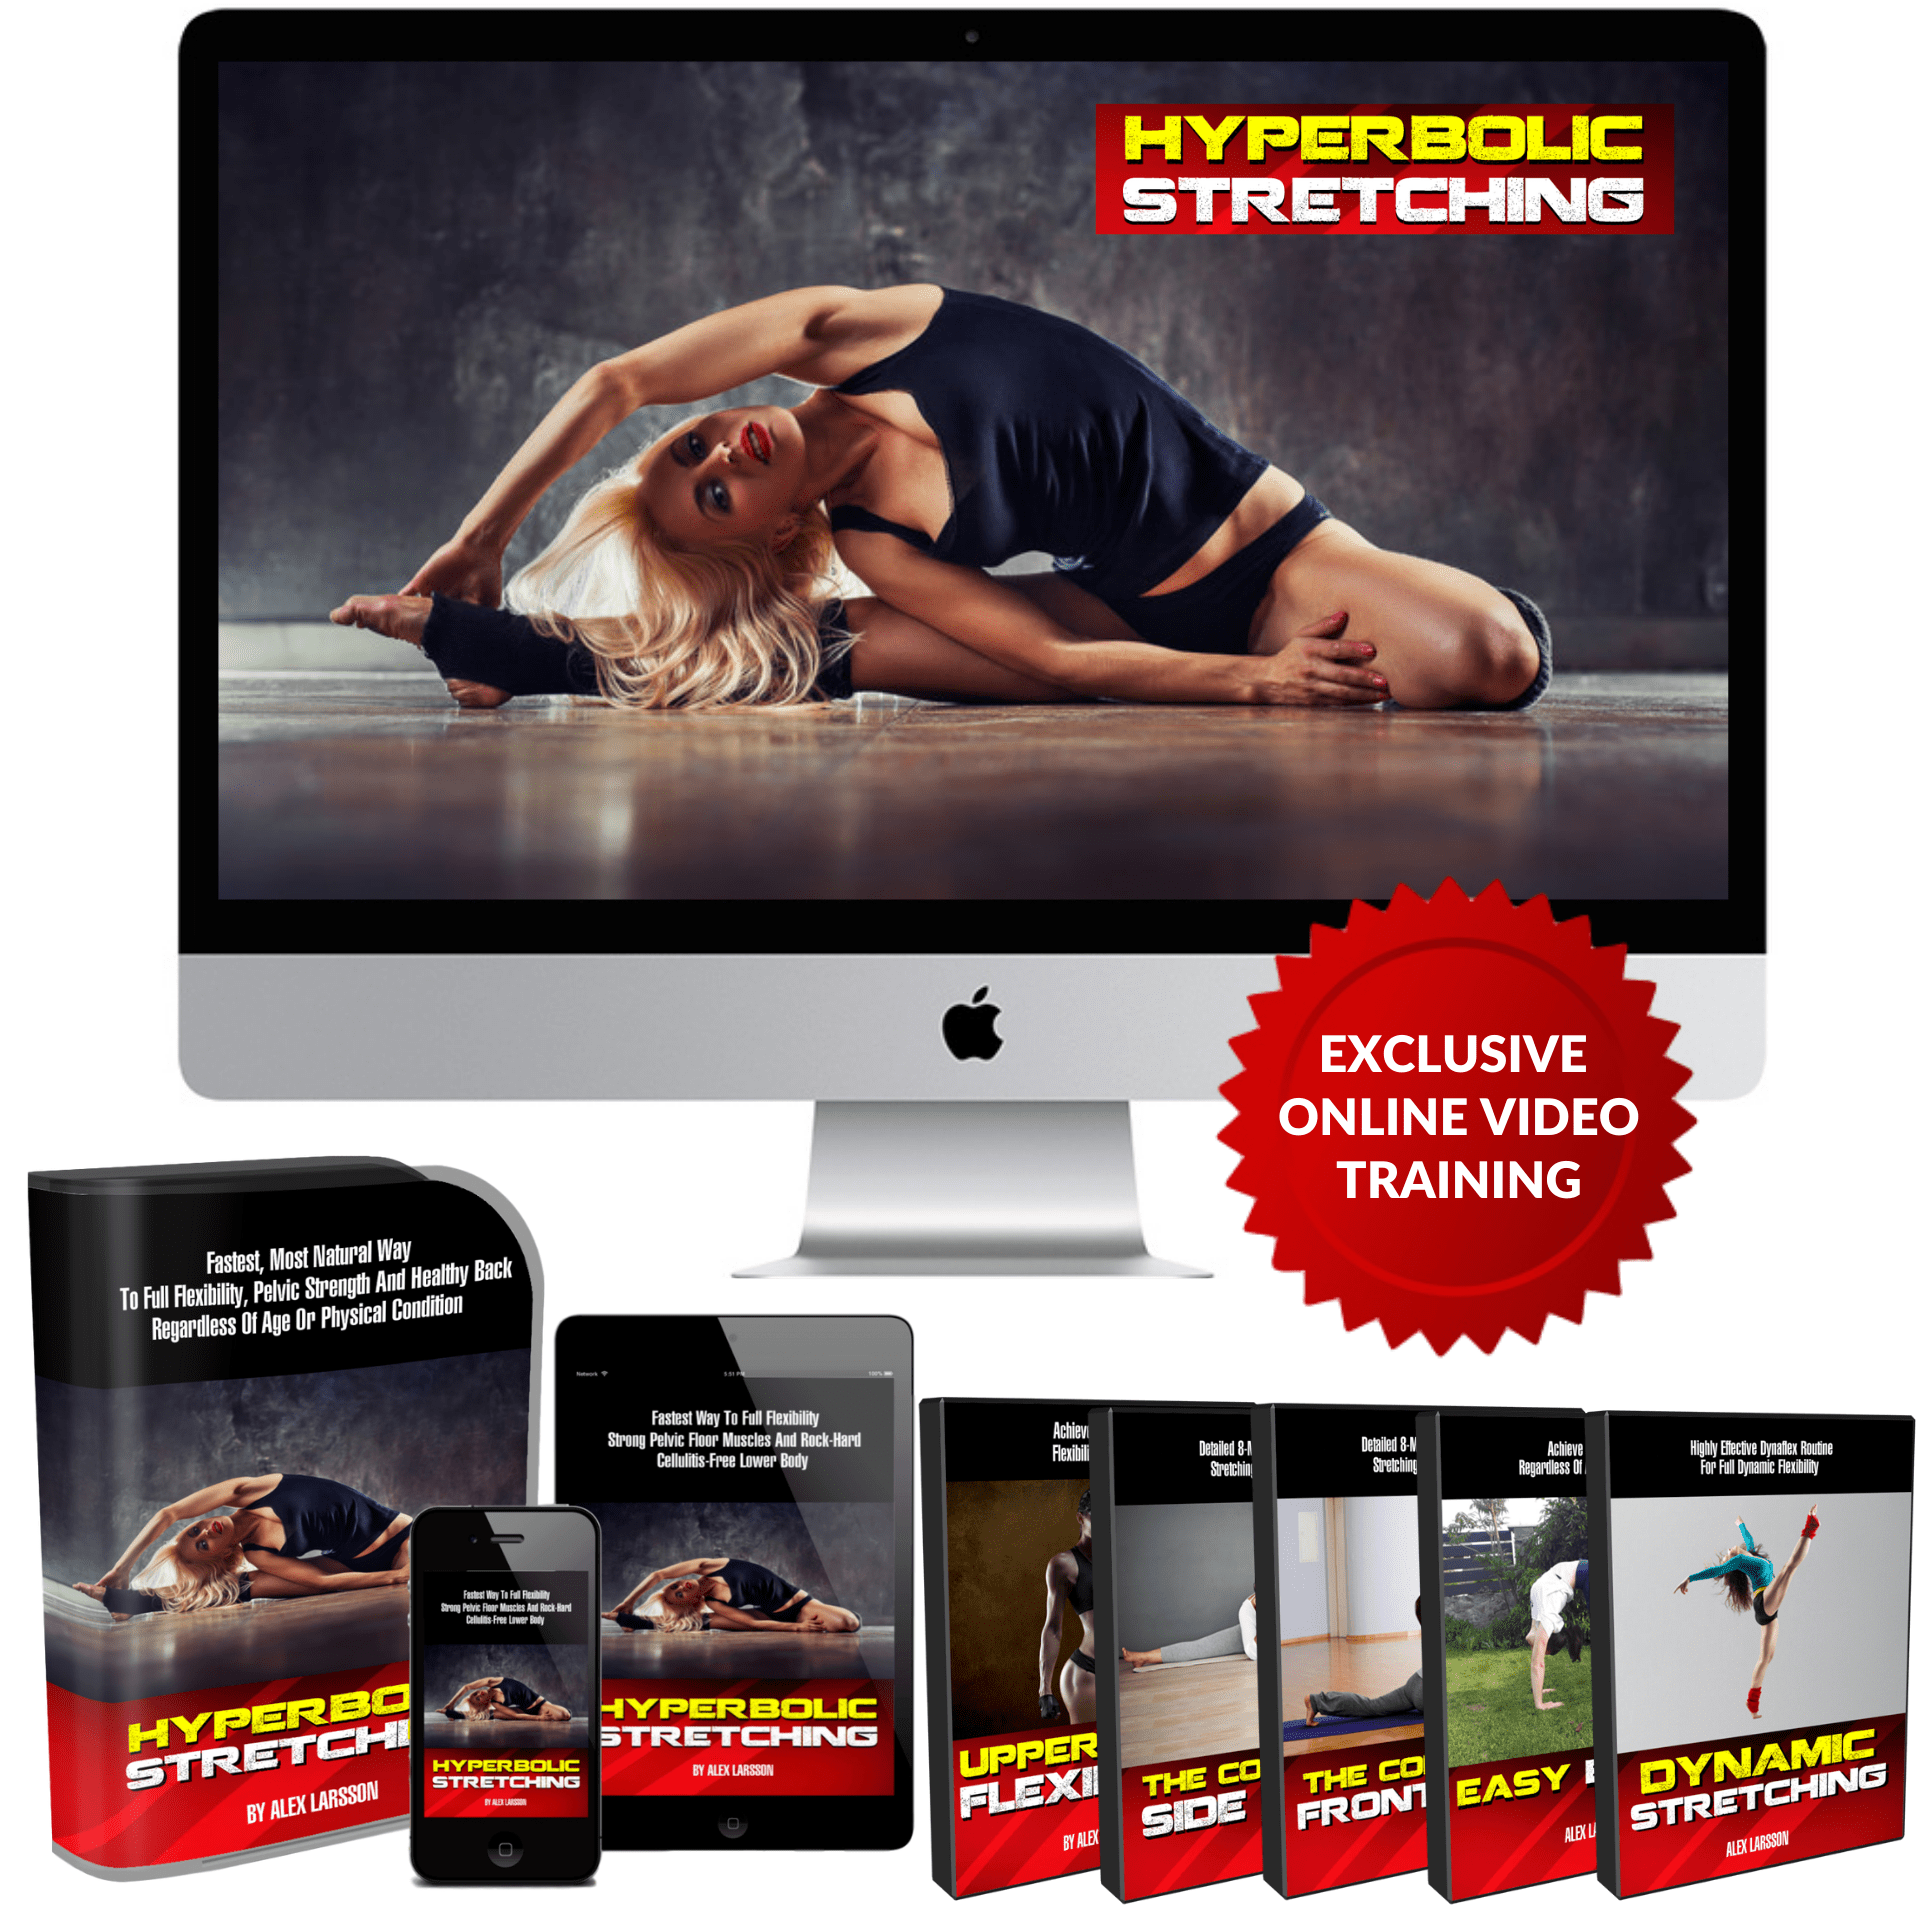 Hyperbolic Stretching is an online program that takes a science-based approach on how to do full splits, unlock hips, & gain whole body flexibility for beginners & advanced athletes.